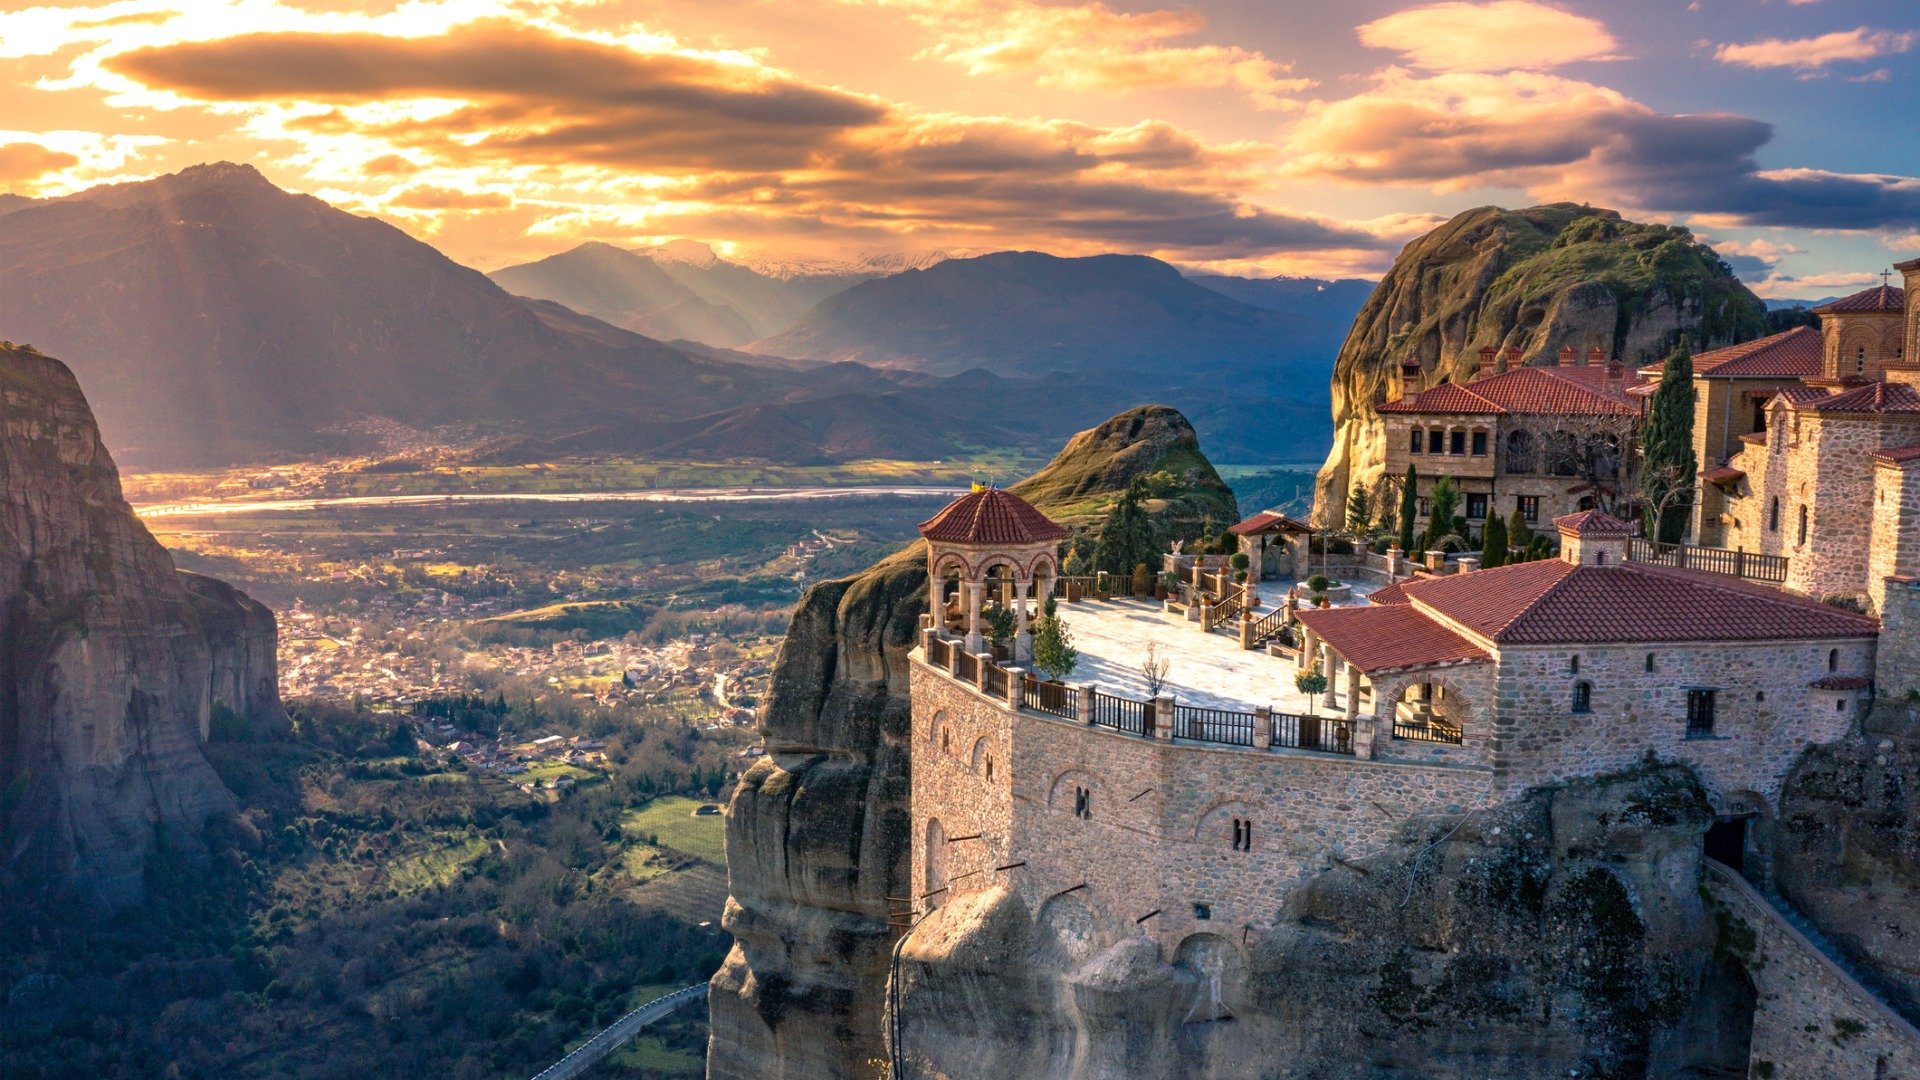 This is a photo of one of the monasteries built atop tall rocks in Meteora. 